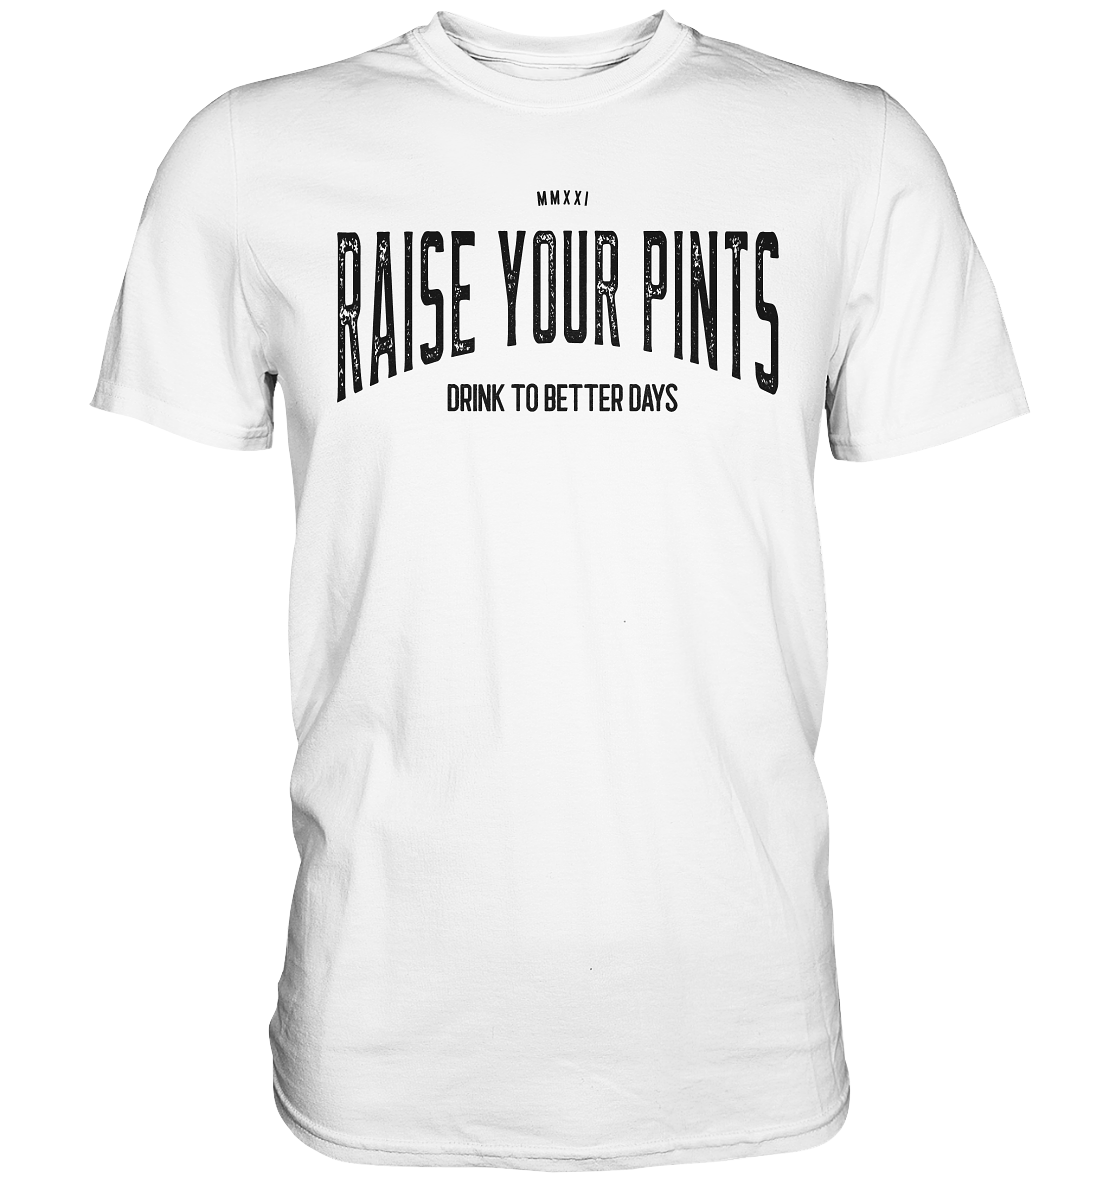 Raise Your Pints "Drink To Better Days" - Premium Shirt